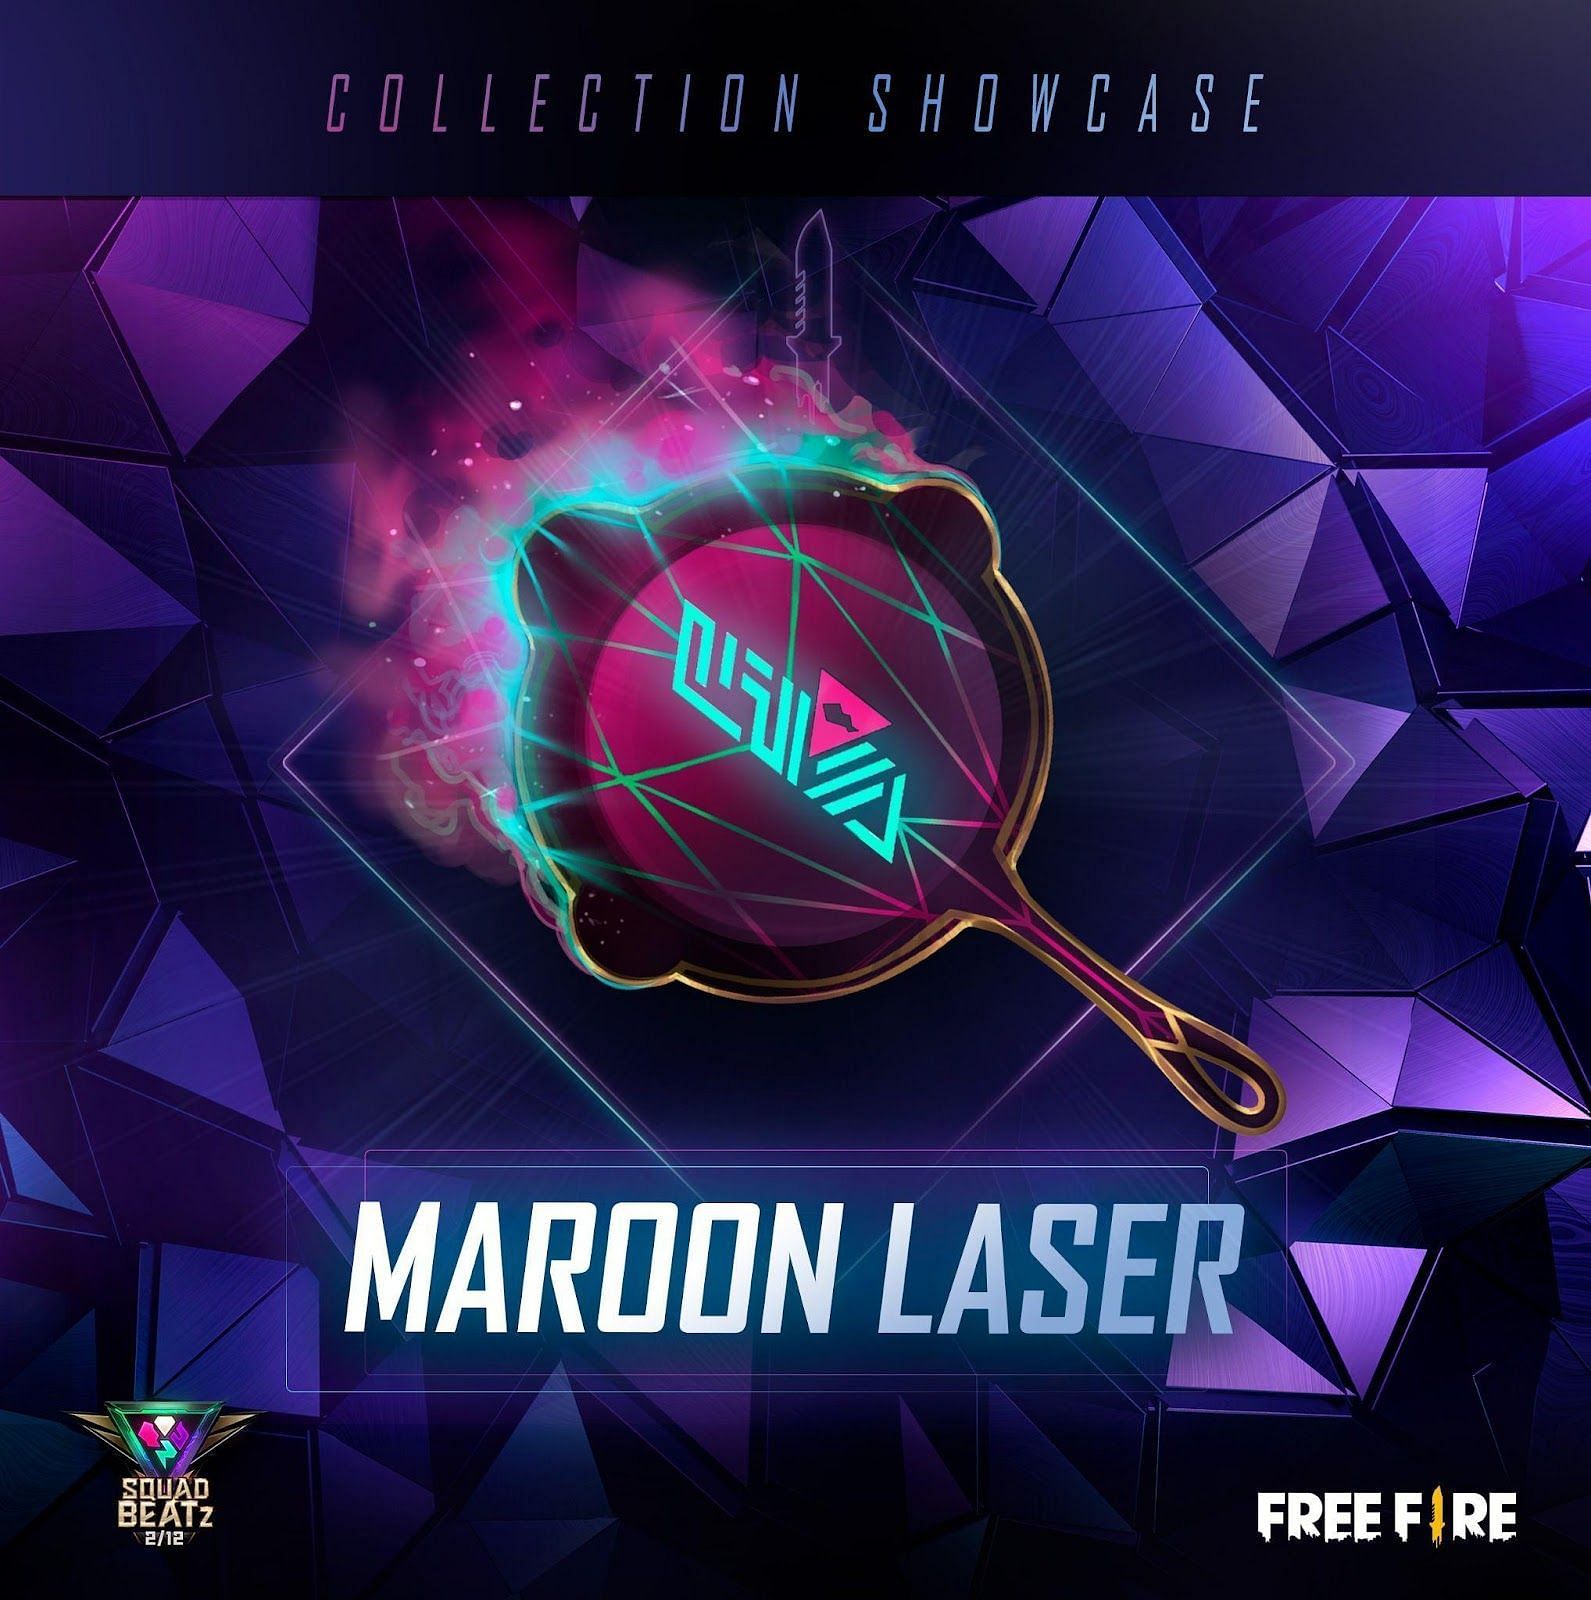 Maroon Laser Pan: New squad Beatz-themed collectible